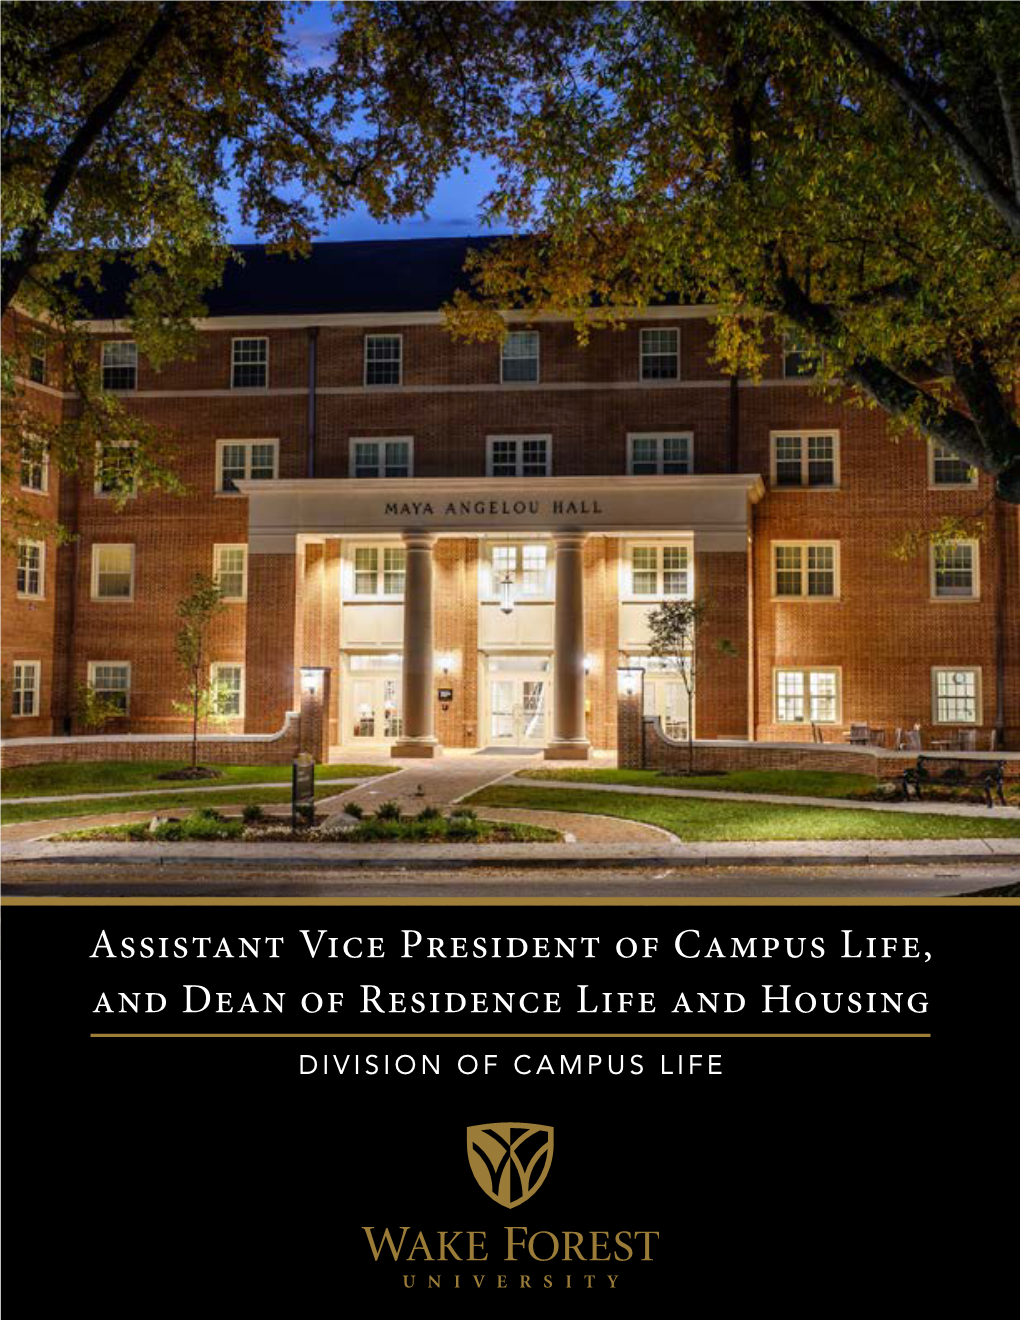 Assistant Vice President of Campus Life, and Dean of Residence Life